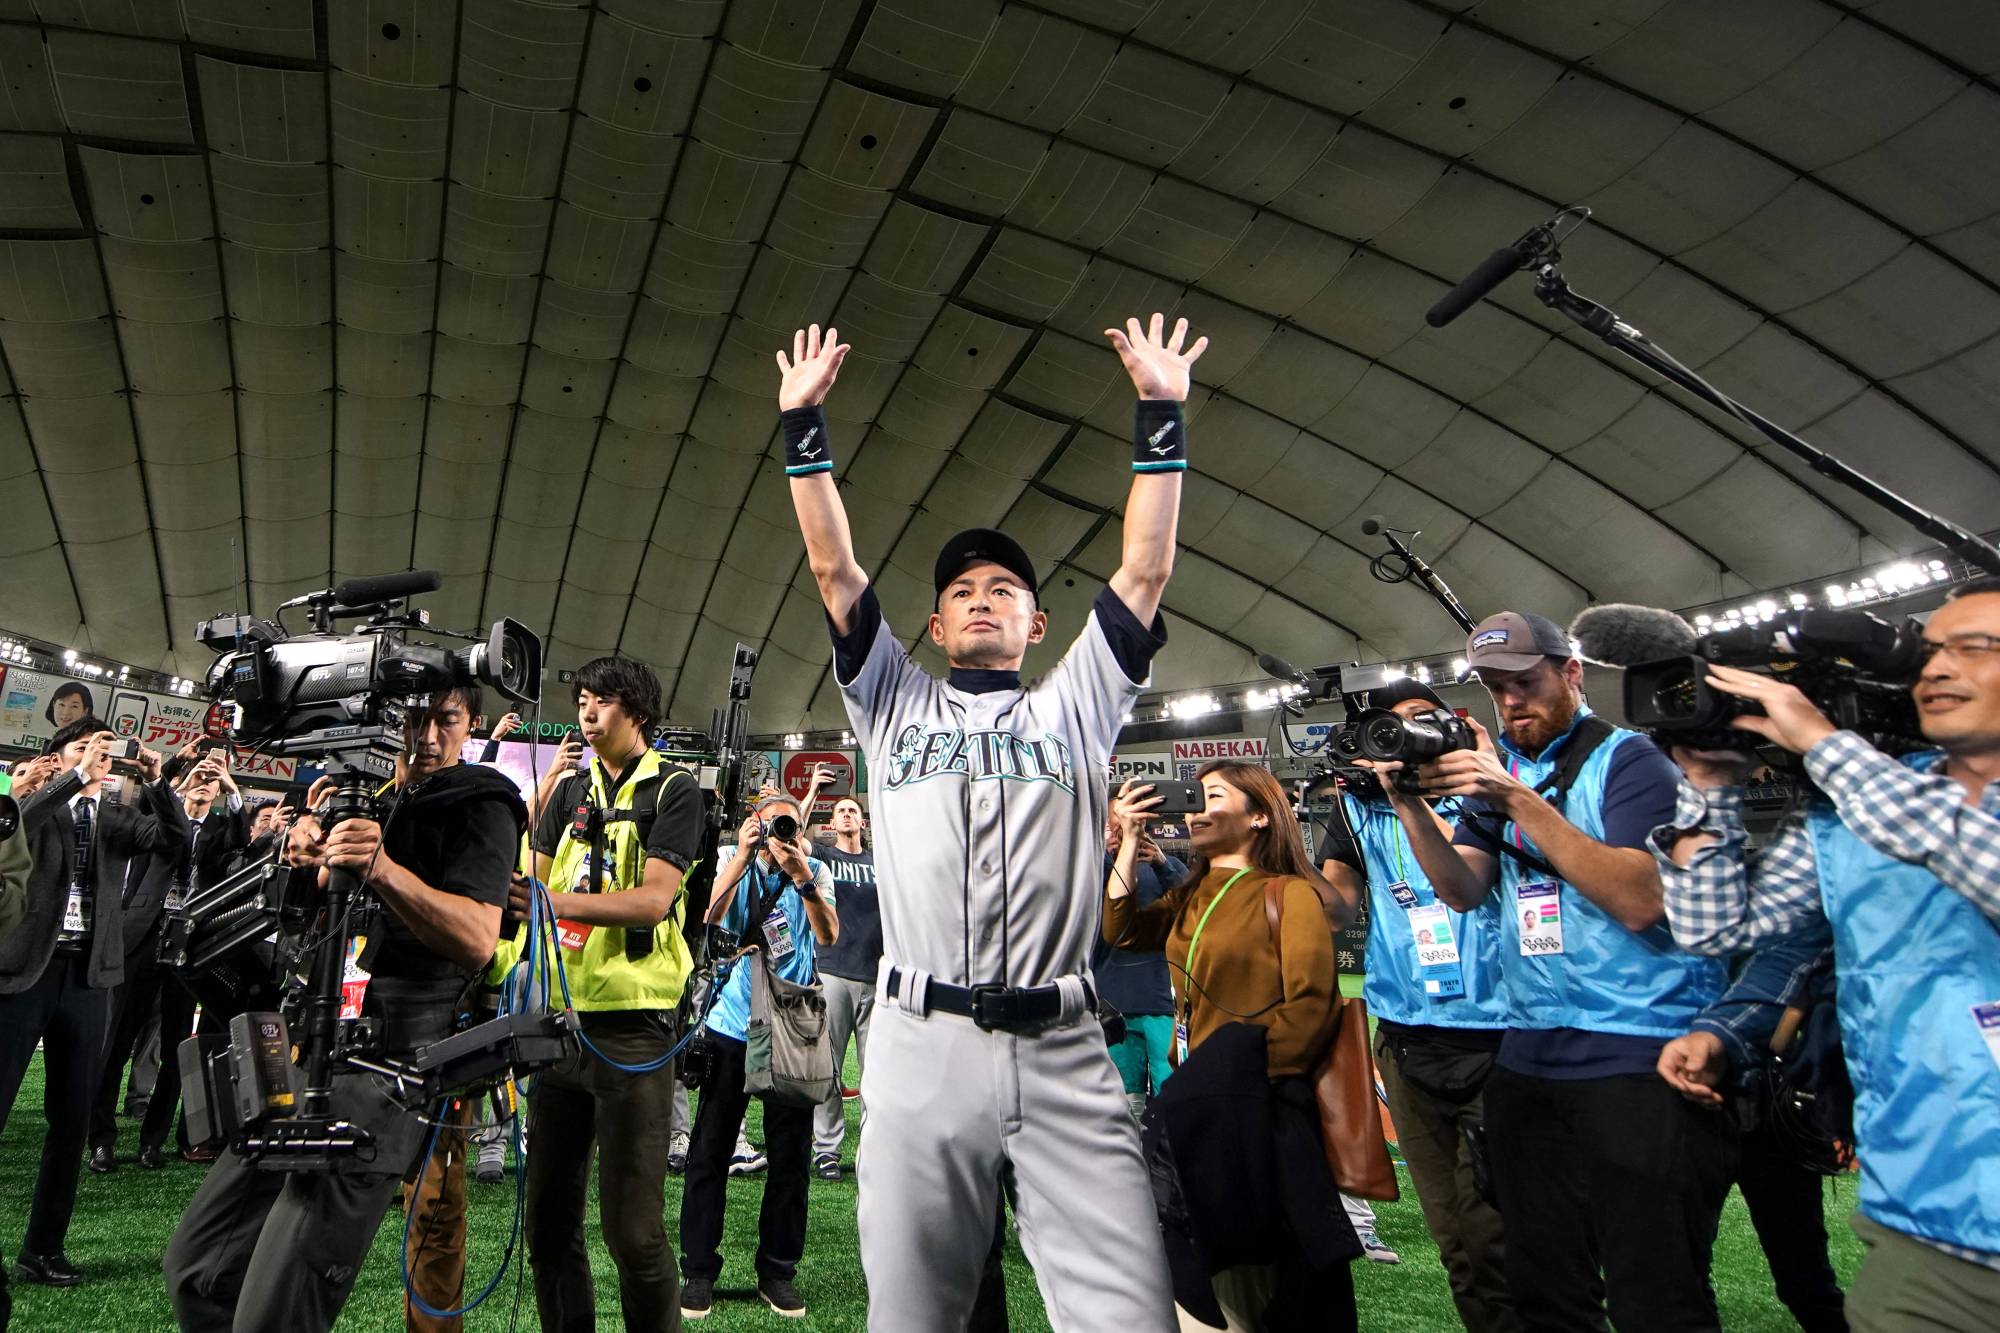 The Mariners' Ichiro Suzuki waves to fans as he leaves the field for the final time as an active player at Tokyo Dome on March 21, 2019.  | USA TODAY / VIA REUTERS